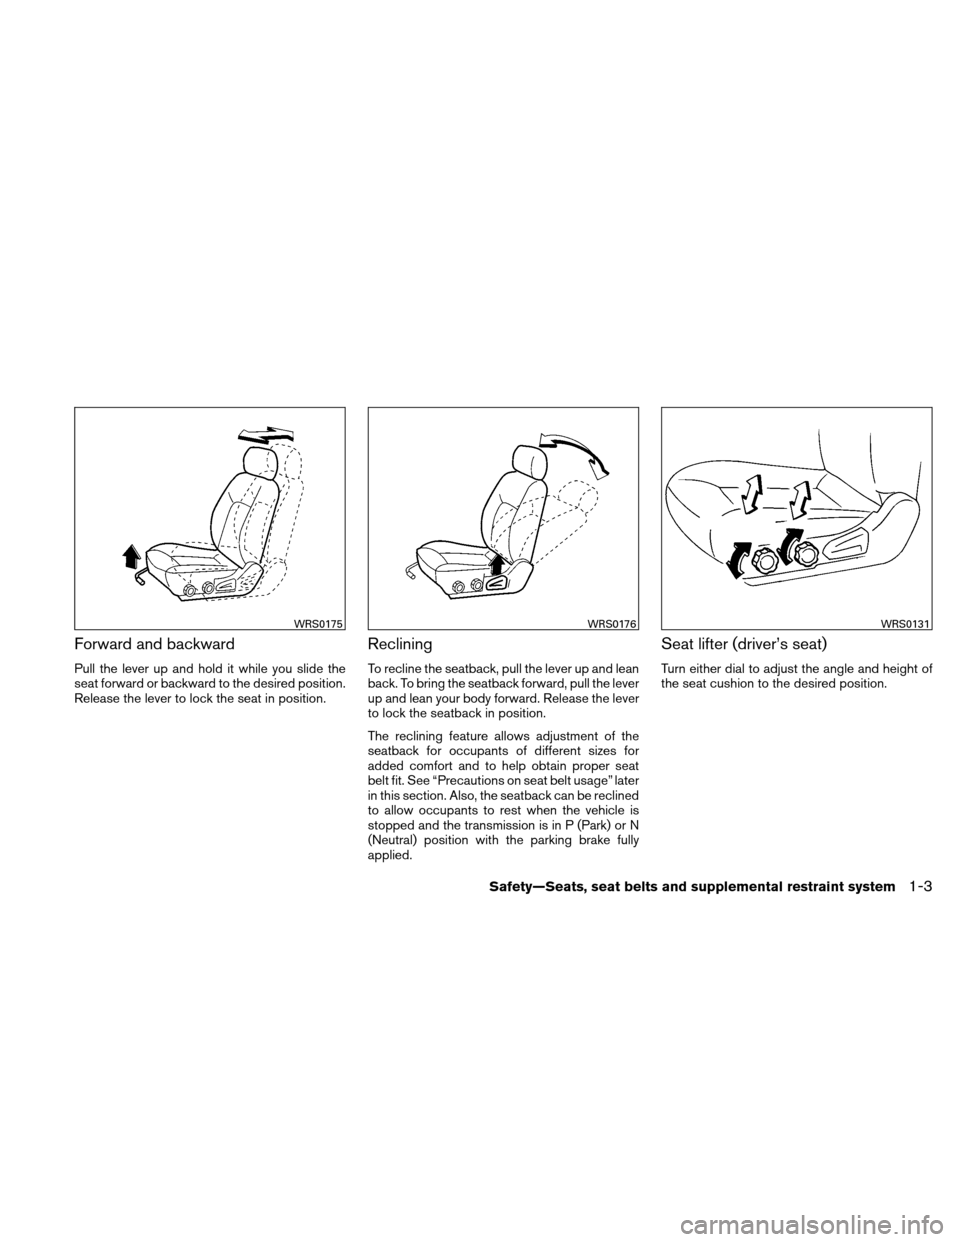 NISSAN XTERRA 2011 N50 / 2.G User Guide Forward and backward
Pull the lever up and hold it while you slide the
seat forward or backward to the desired position.
Release the lever to lock the seat in position.
Reclining
To recline the seatba